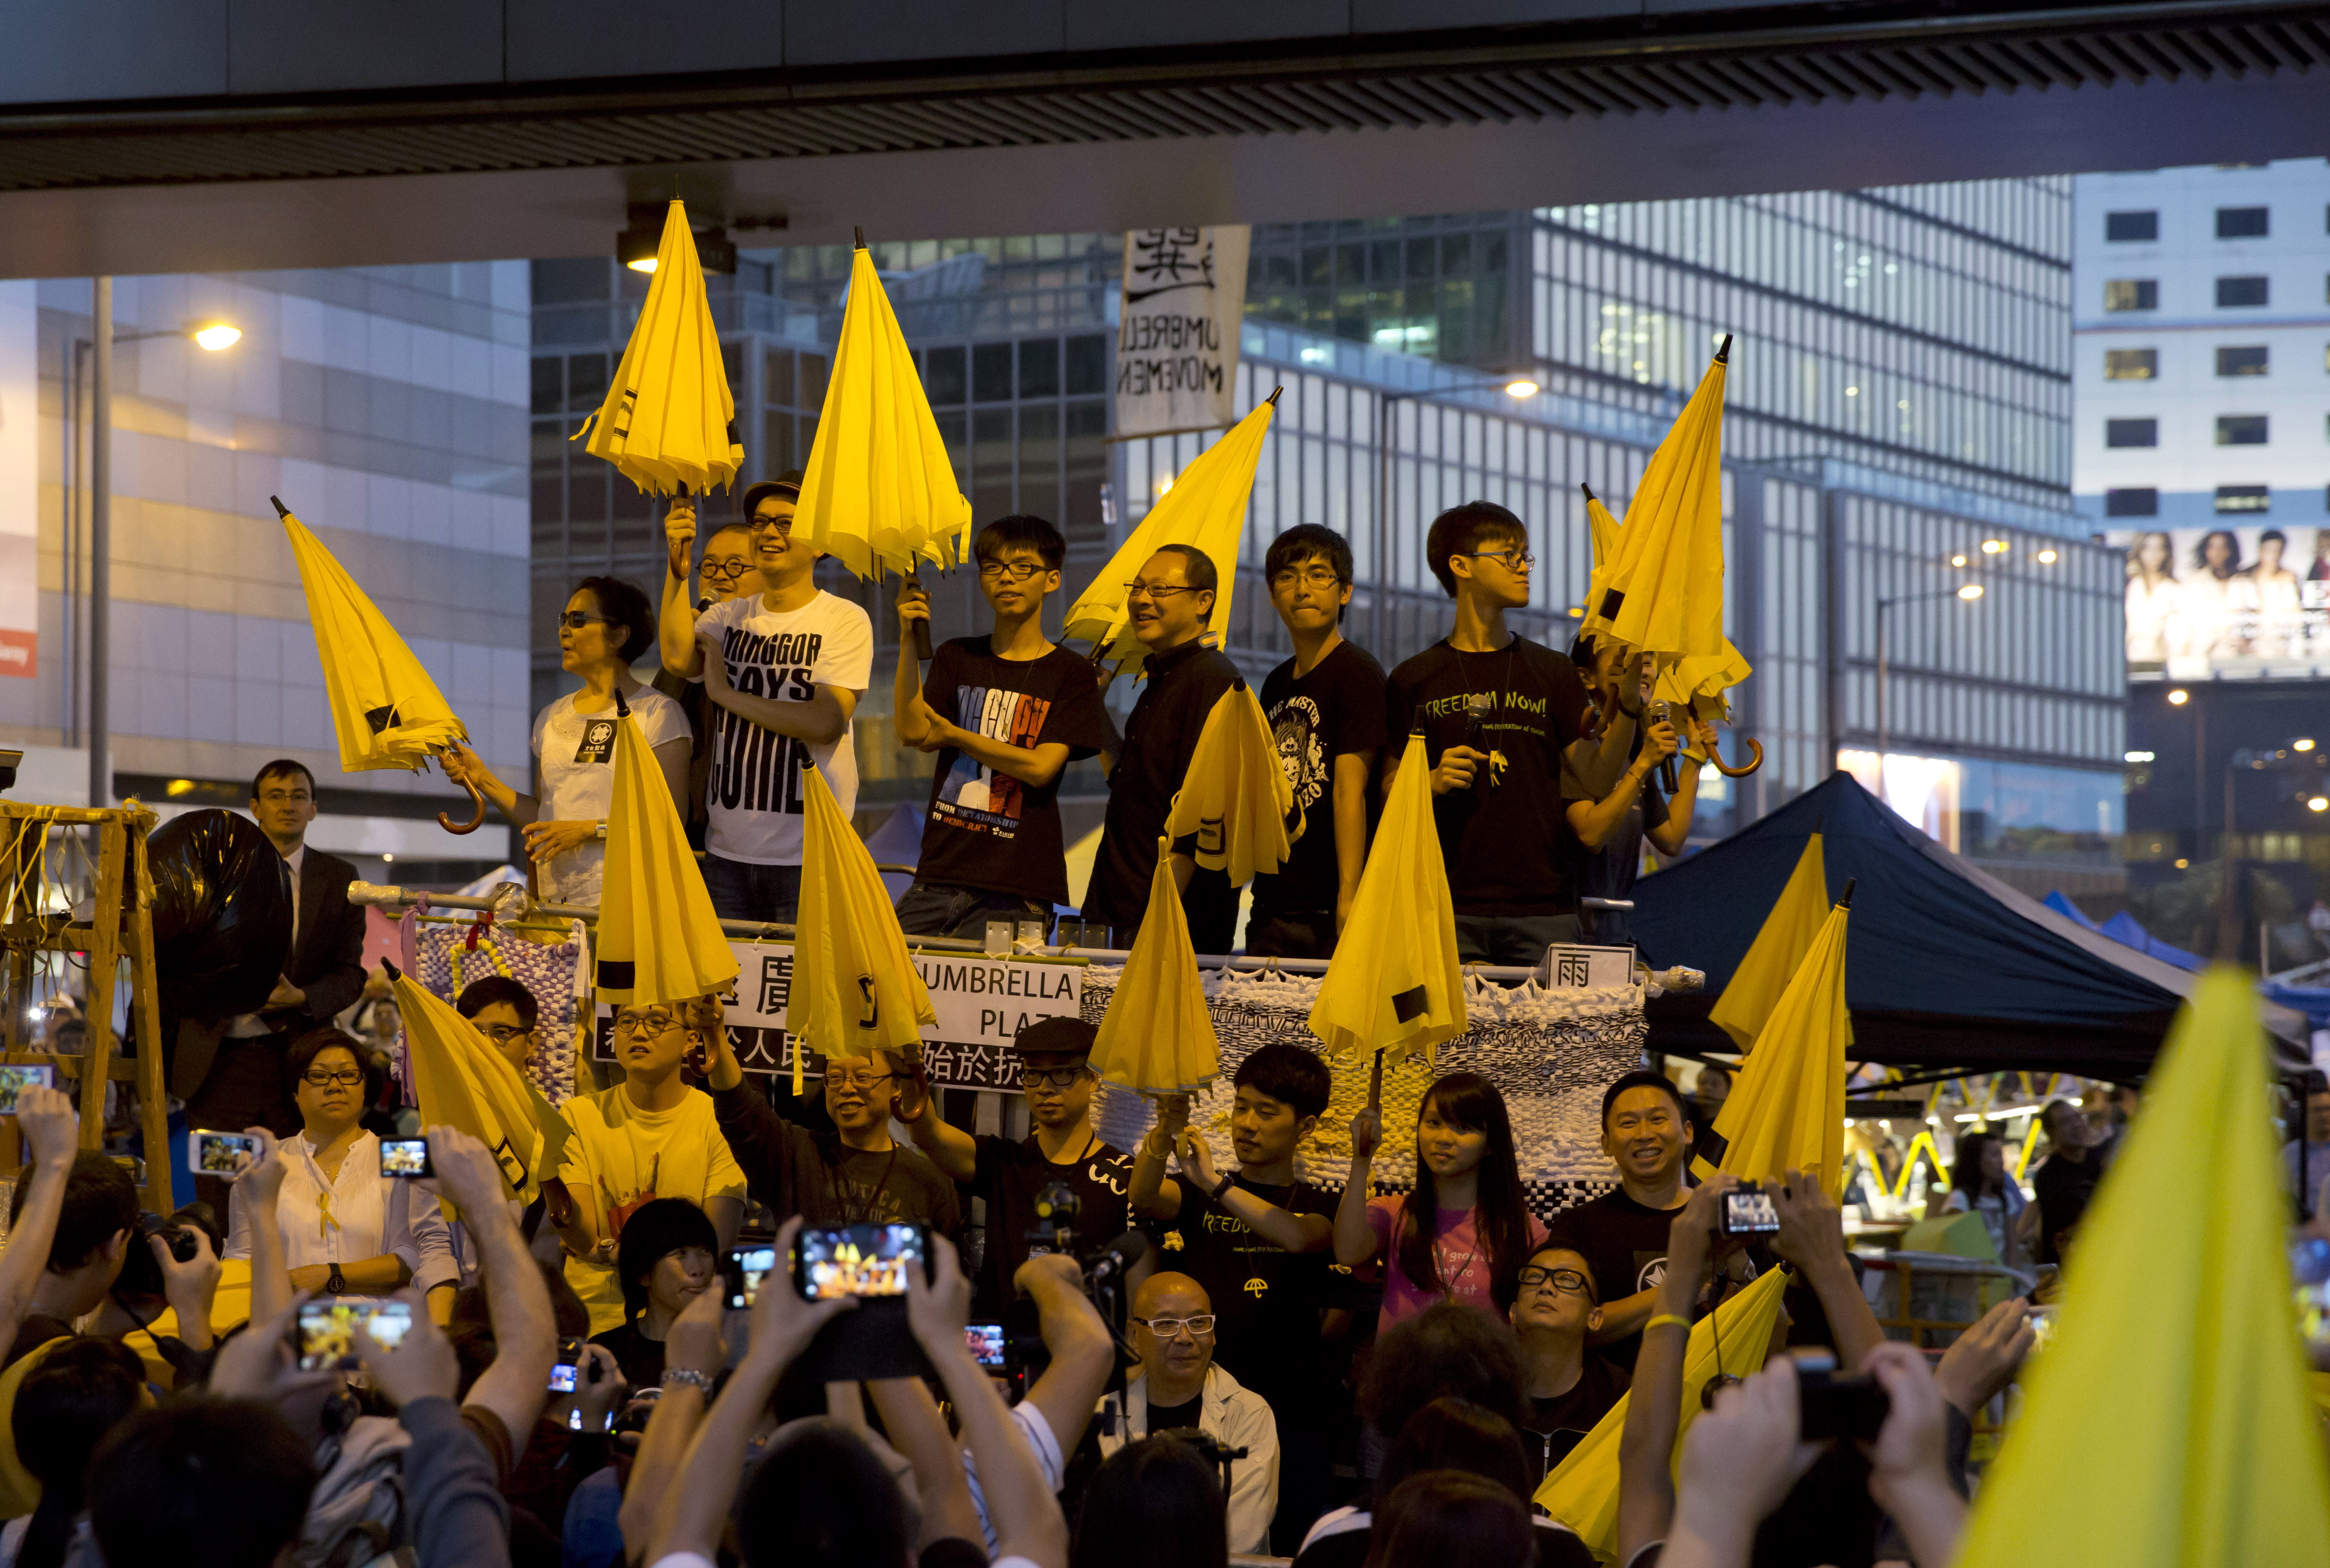 Standing on the stage in front of protesters, Hong Kong actress Deanie Yip, left, and singer Anthony Wong, second left, join student leader Joshua Wong, third left, founder of the Occupy Central civil disobedience movement Benny Tai, third right, and students leaders, Alex Chow, second right, and Tommy Cheung, as they raise umbrellas at a rally in the occupied areas outside government headquarters in Hong Kong's Admiralty Tuesday, Oct. 28, 2014. Pro-democracy protests in Hong Kong stretched into a fourth week, as student leaders pushing for a greater say in choosing the territory's chief executive met with government officials but agreed on little. (AP Photo/Kin Cheung)